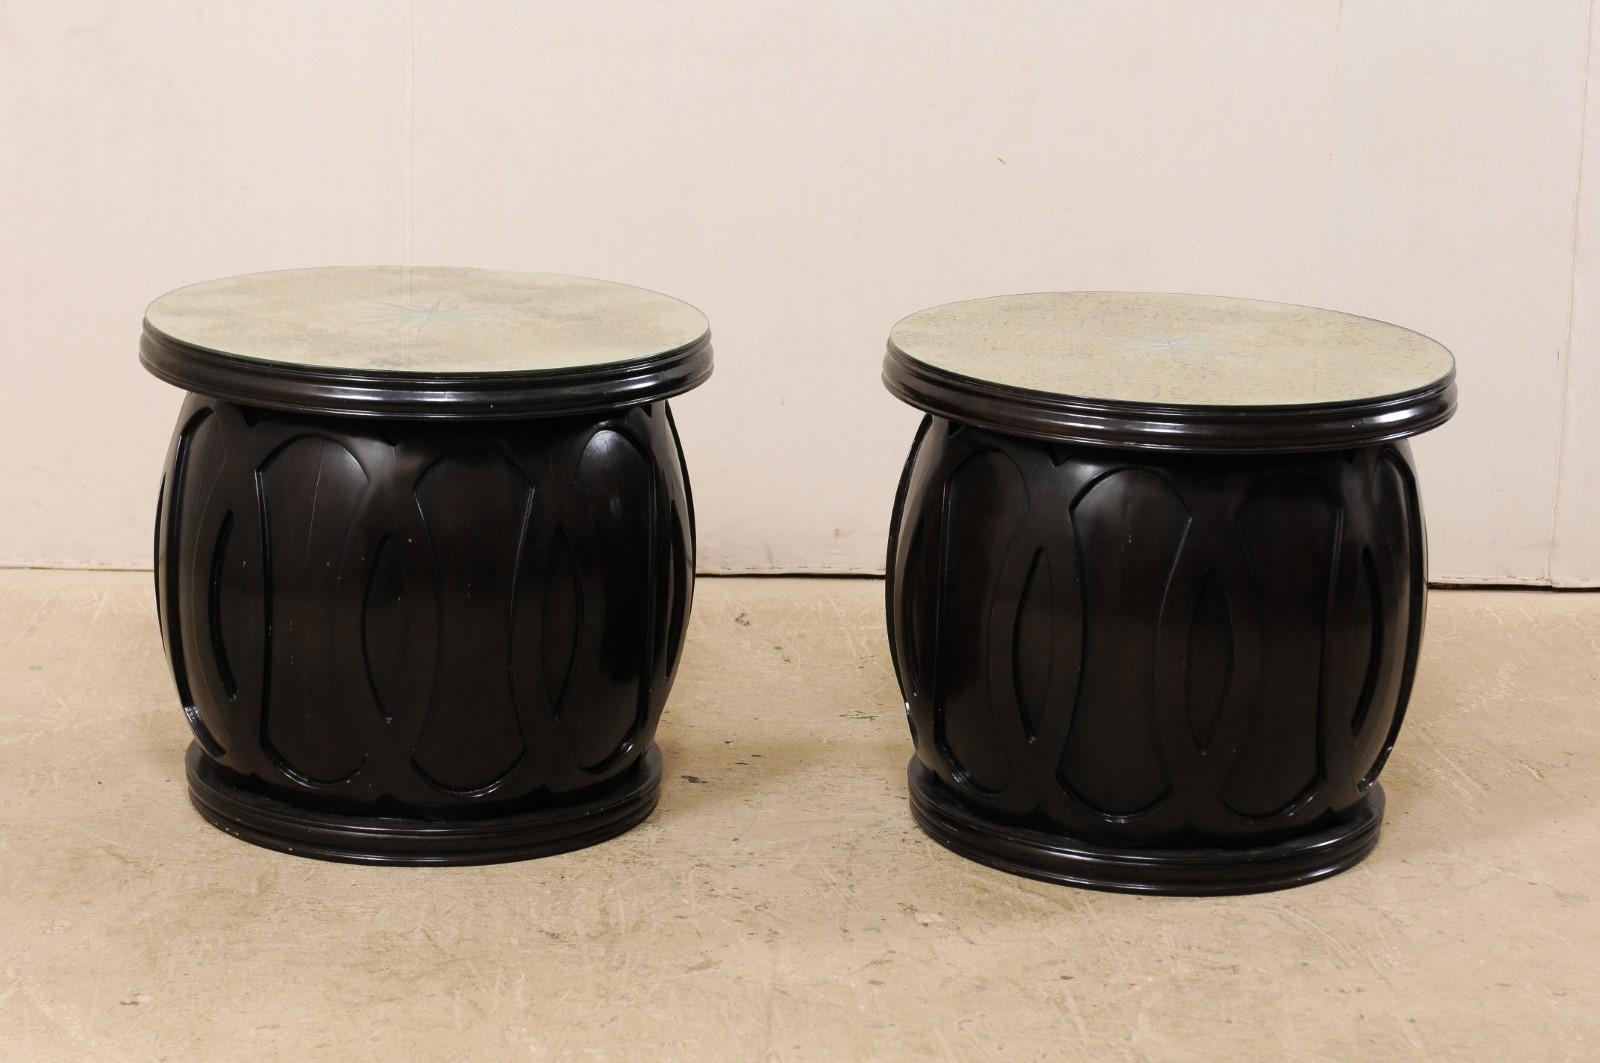 Drum Style Side Tables with Artisan Crafted Verre Églomisé Sunburst Mirror Tops 4